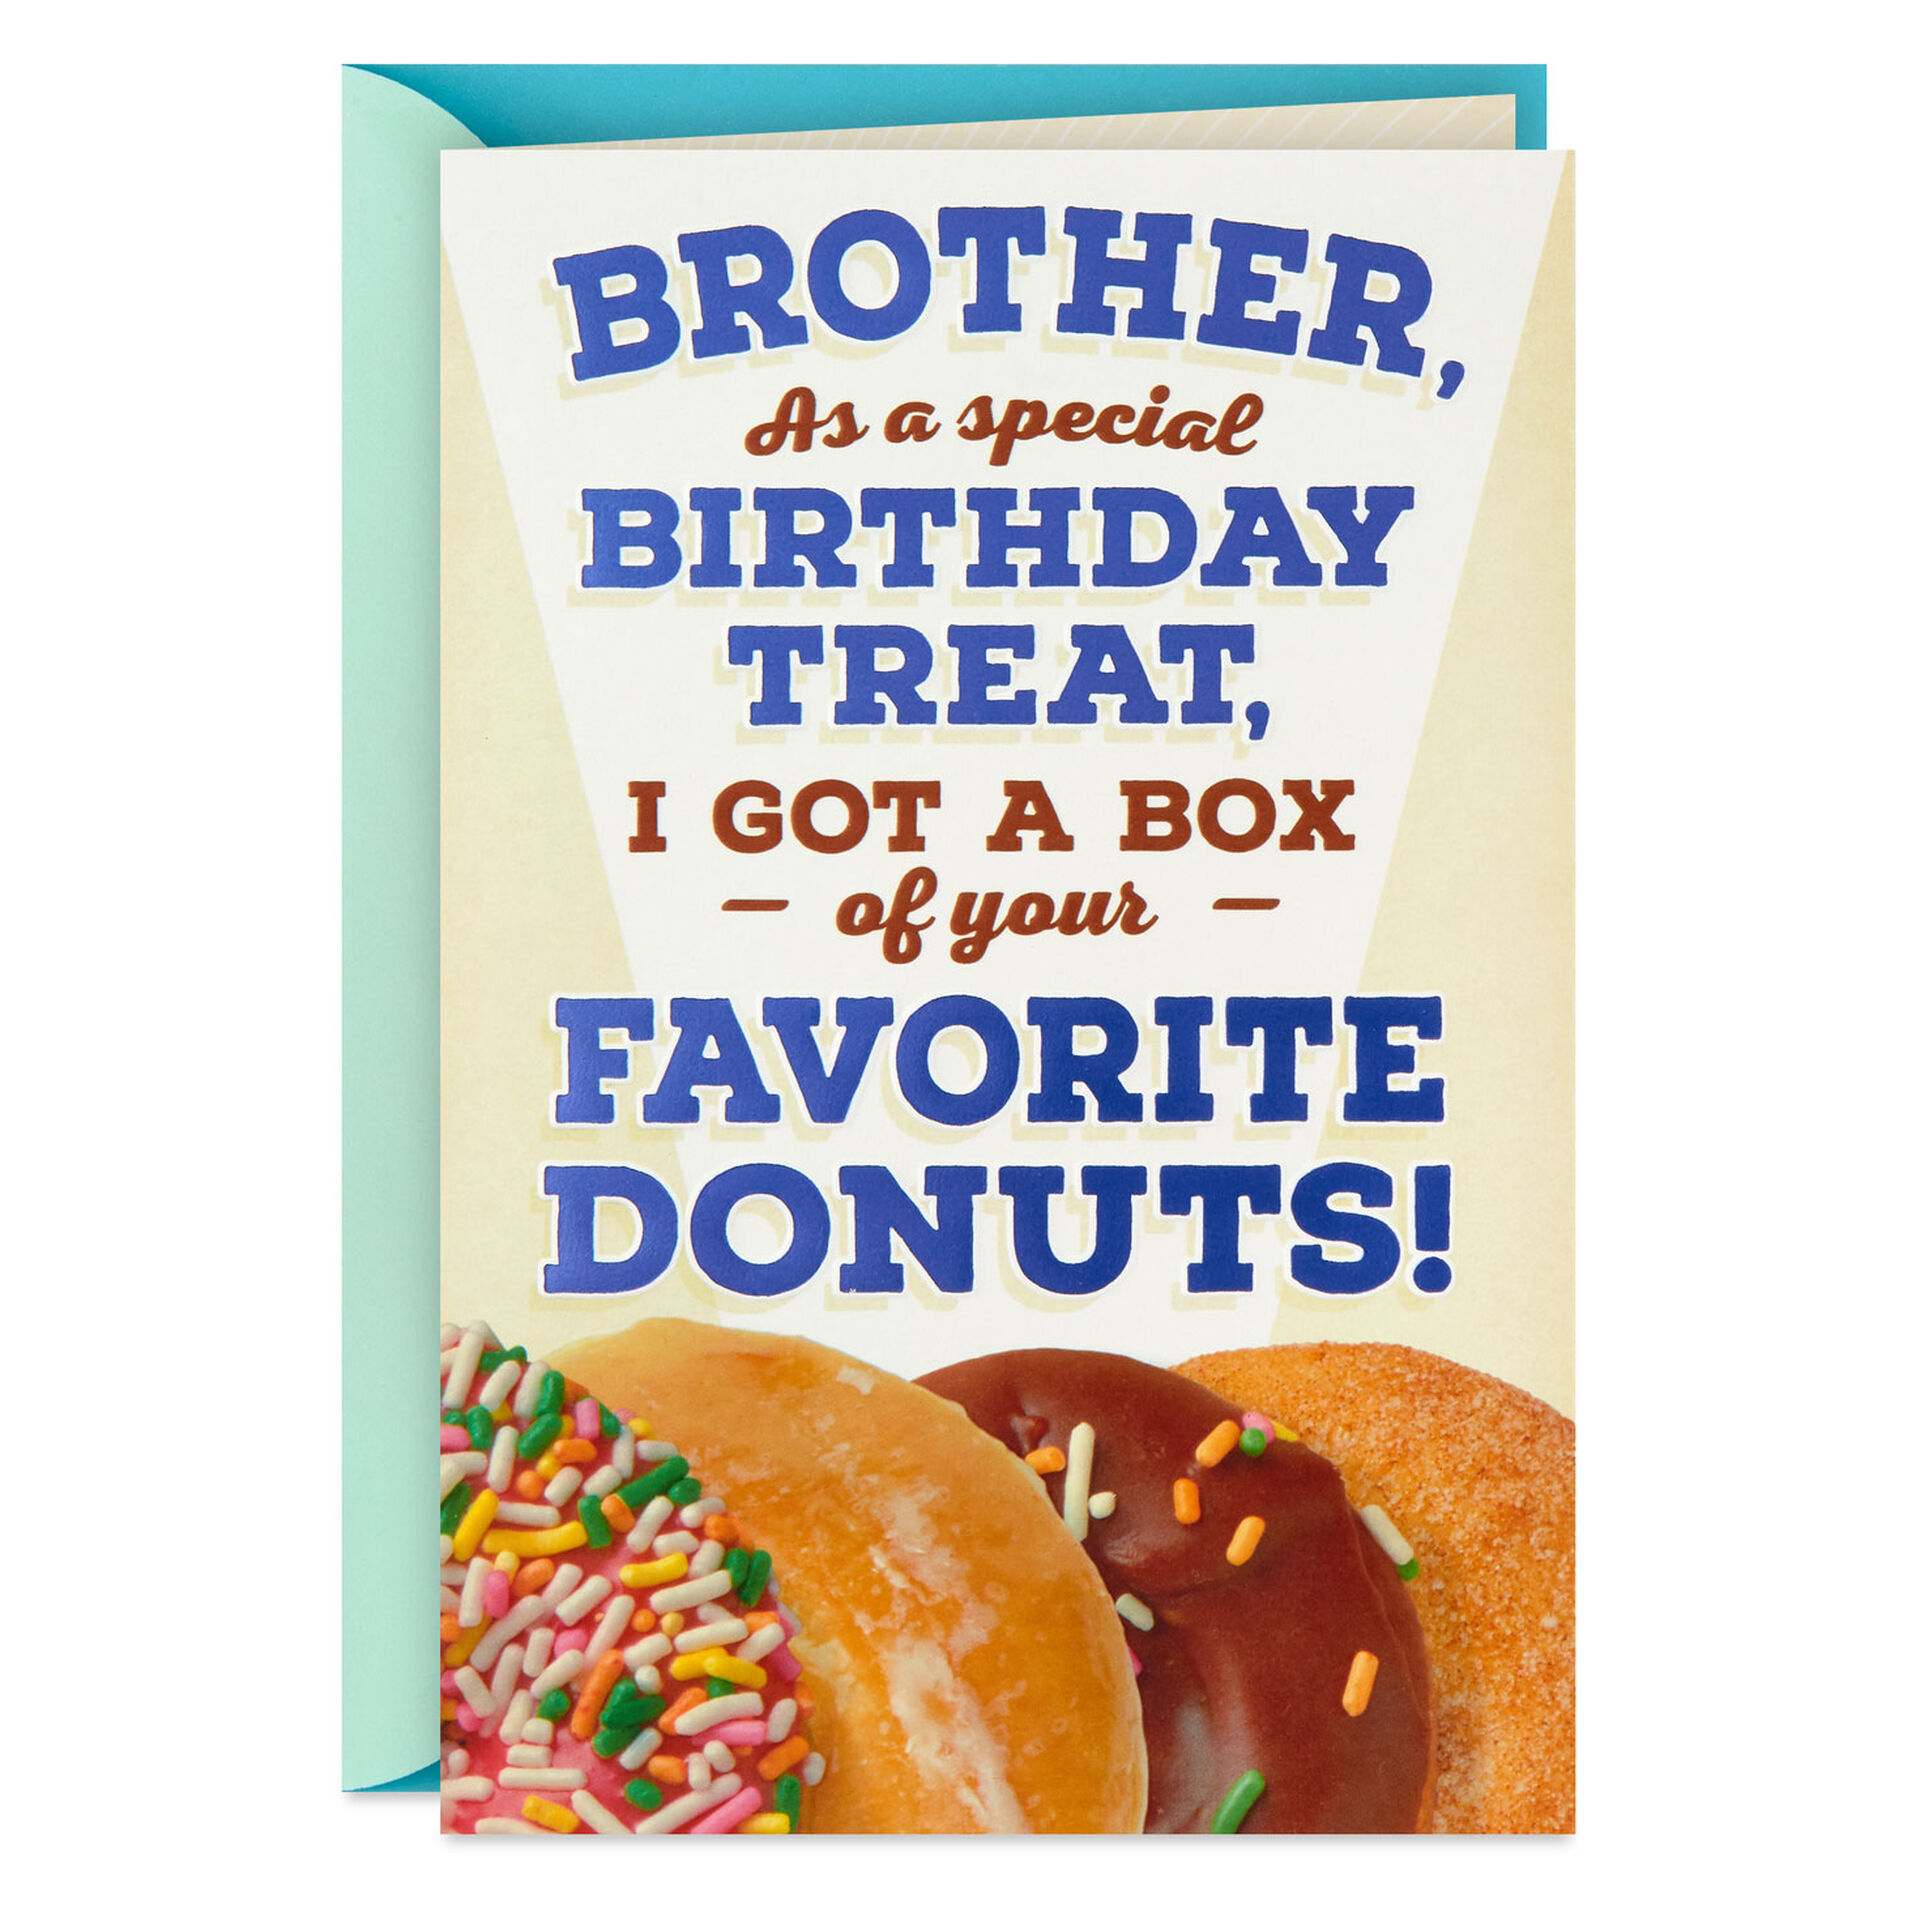 Donuts-Funny-PopUp-Birthday-Card-for-Brother_499MAN3430_01